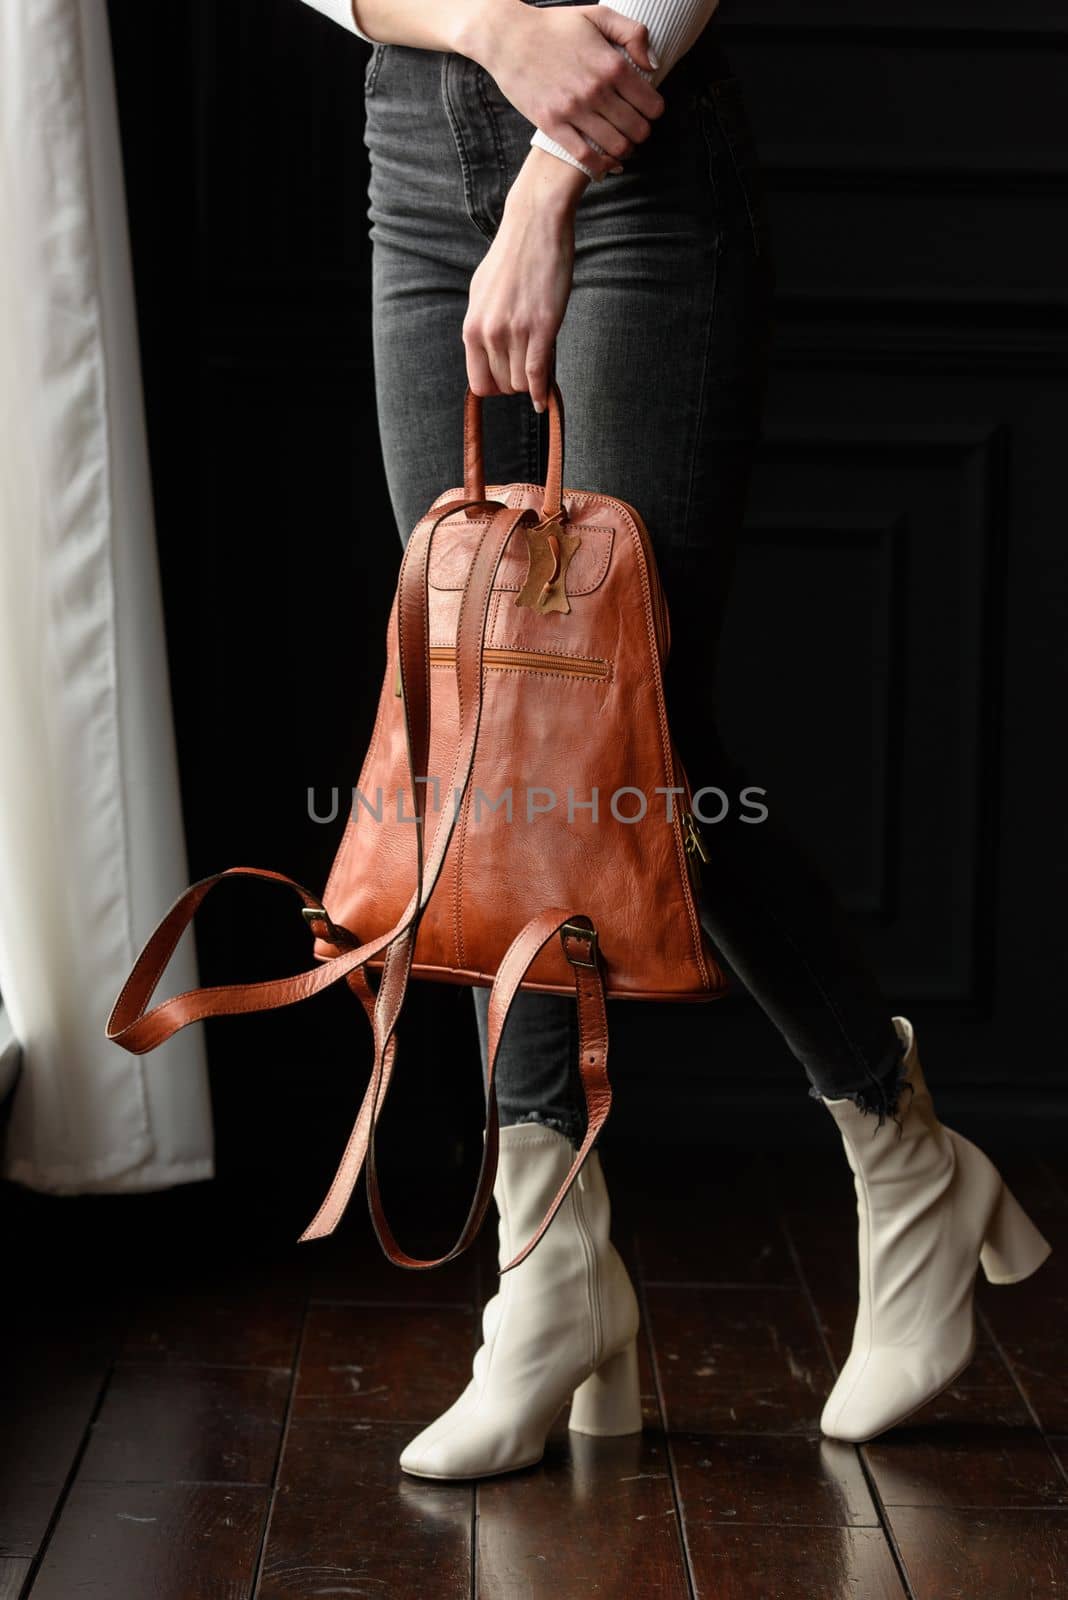 photo of a woman with a orange leather backpack . indoors photo by Ashtray25